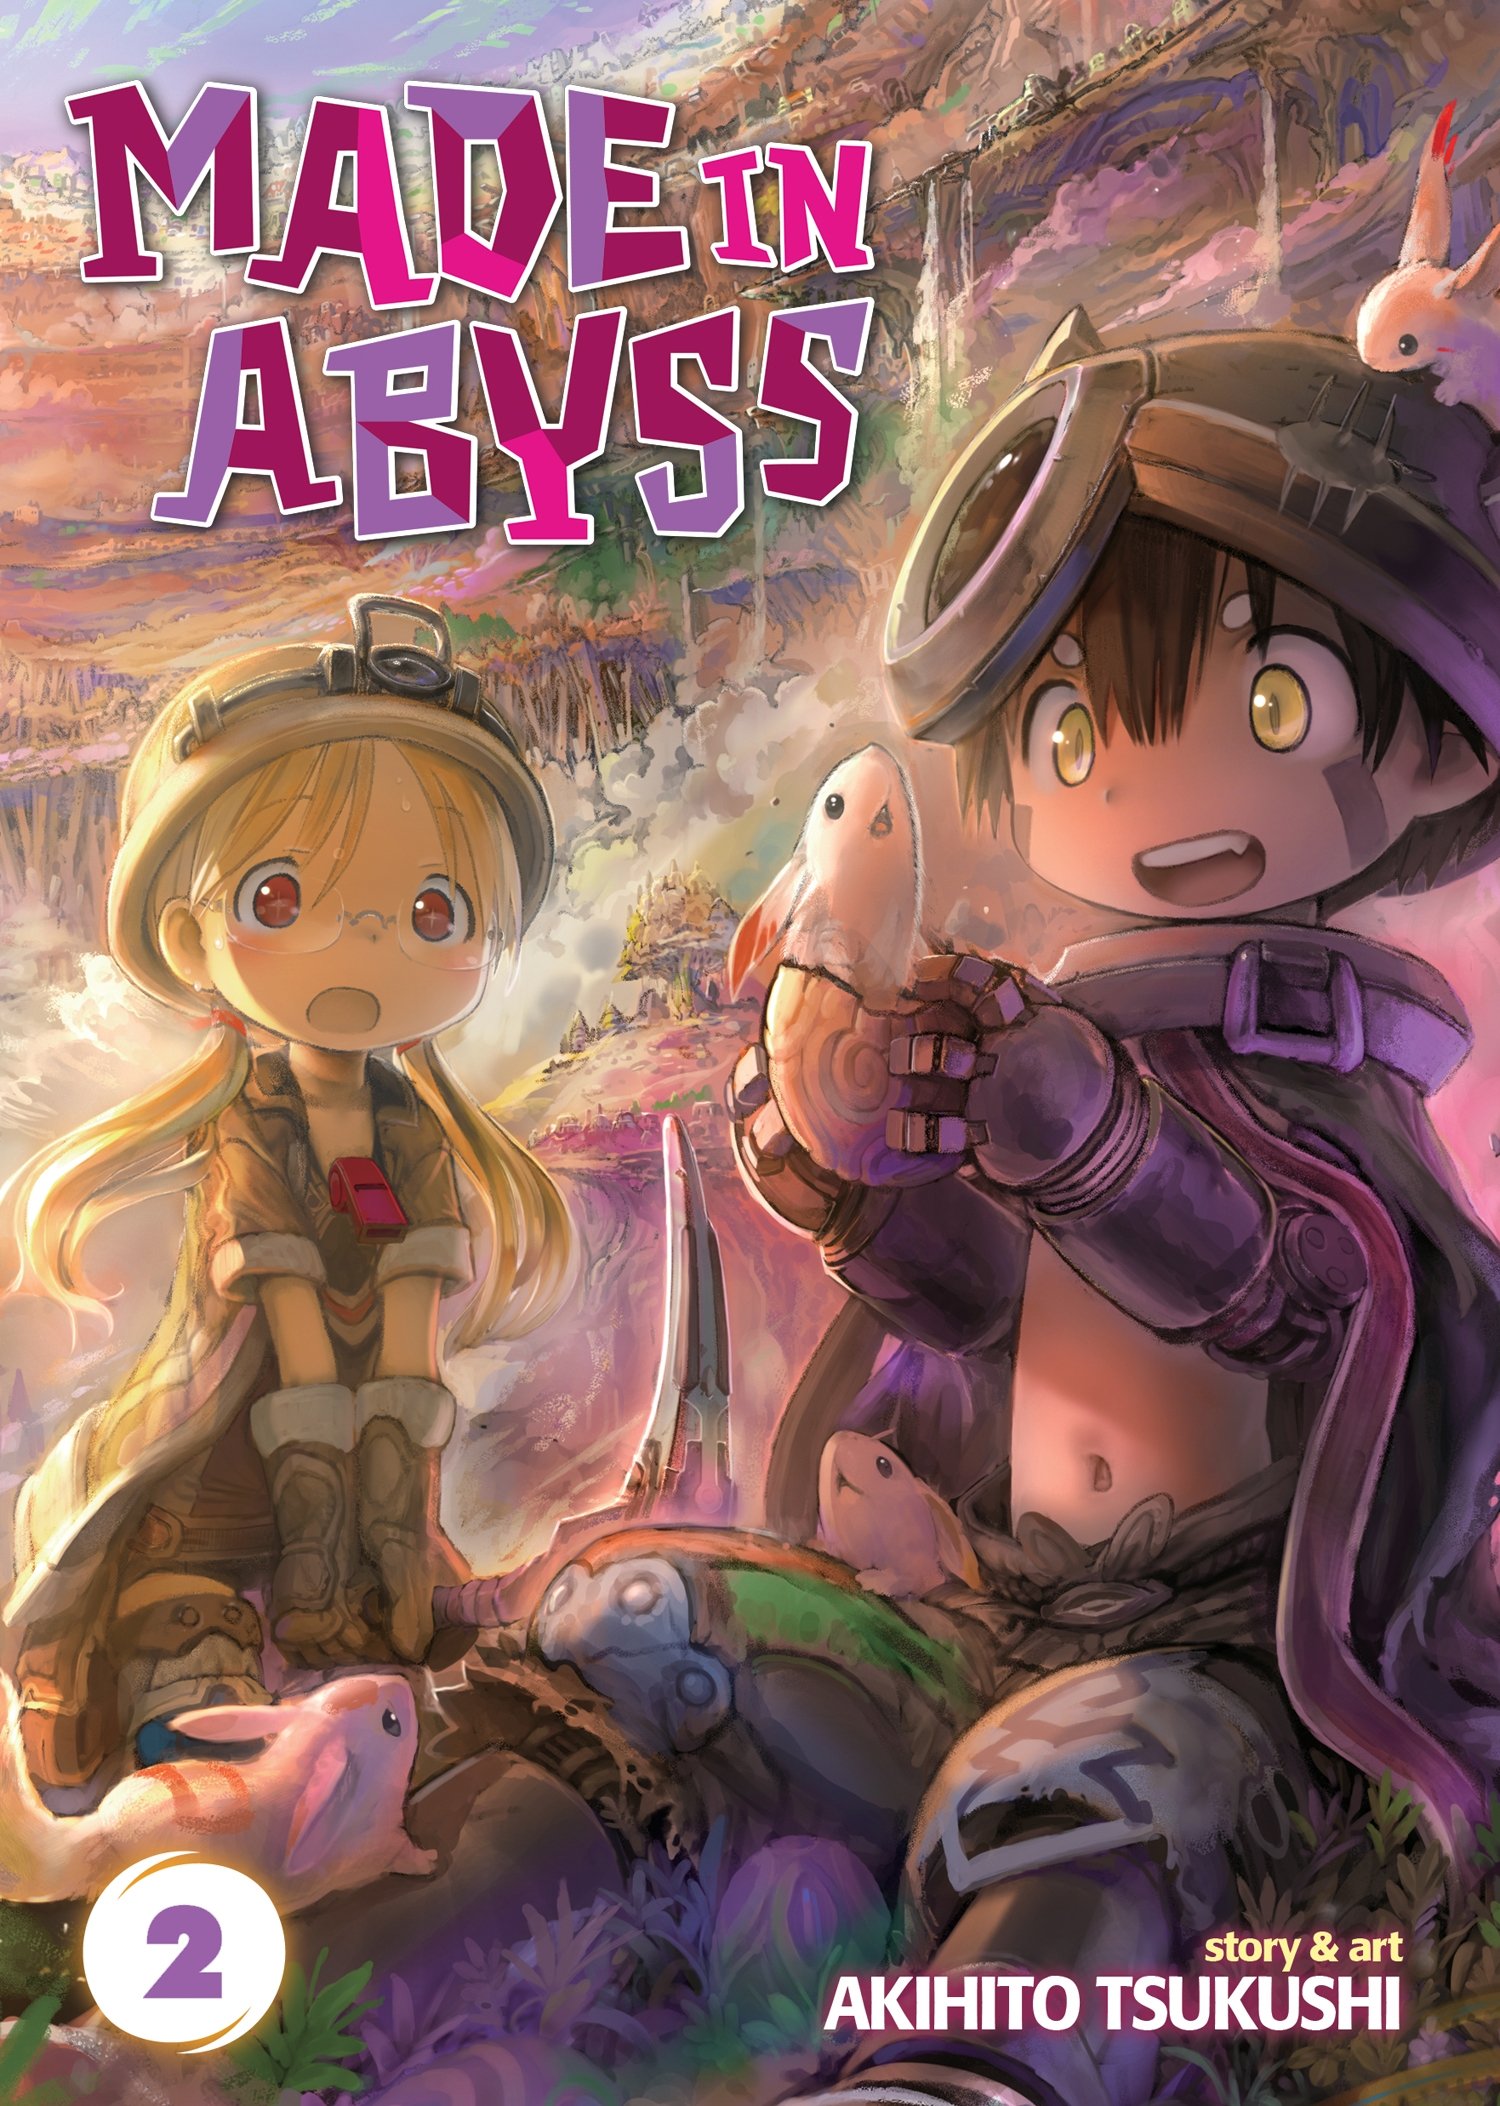 made in abyss.jpg